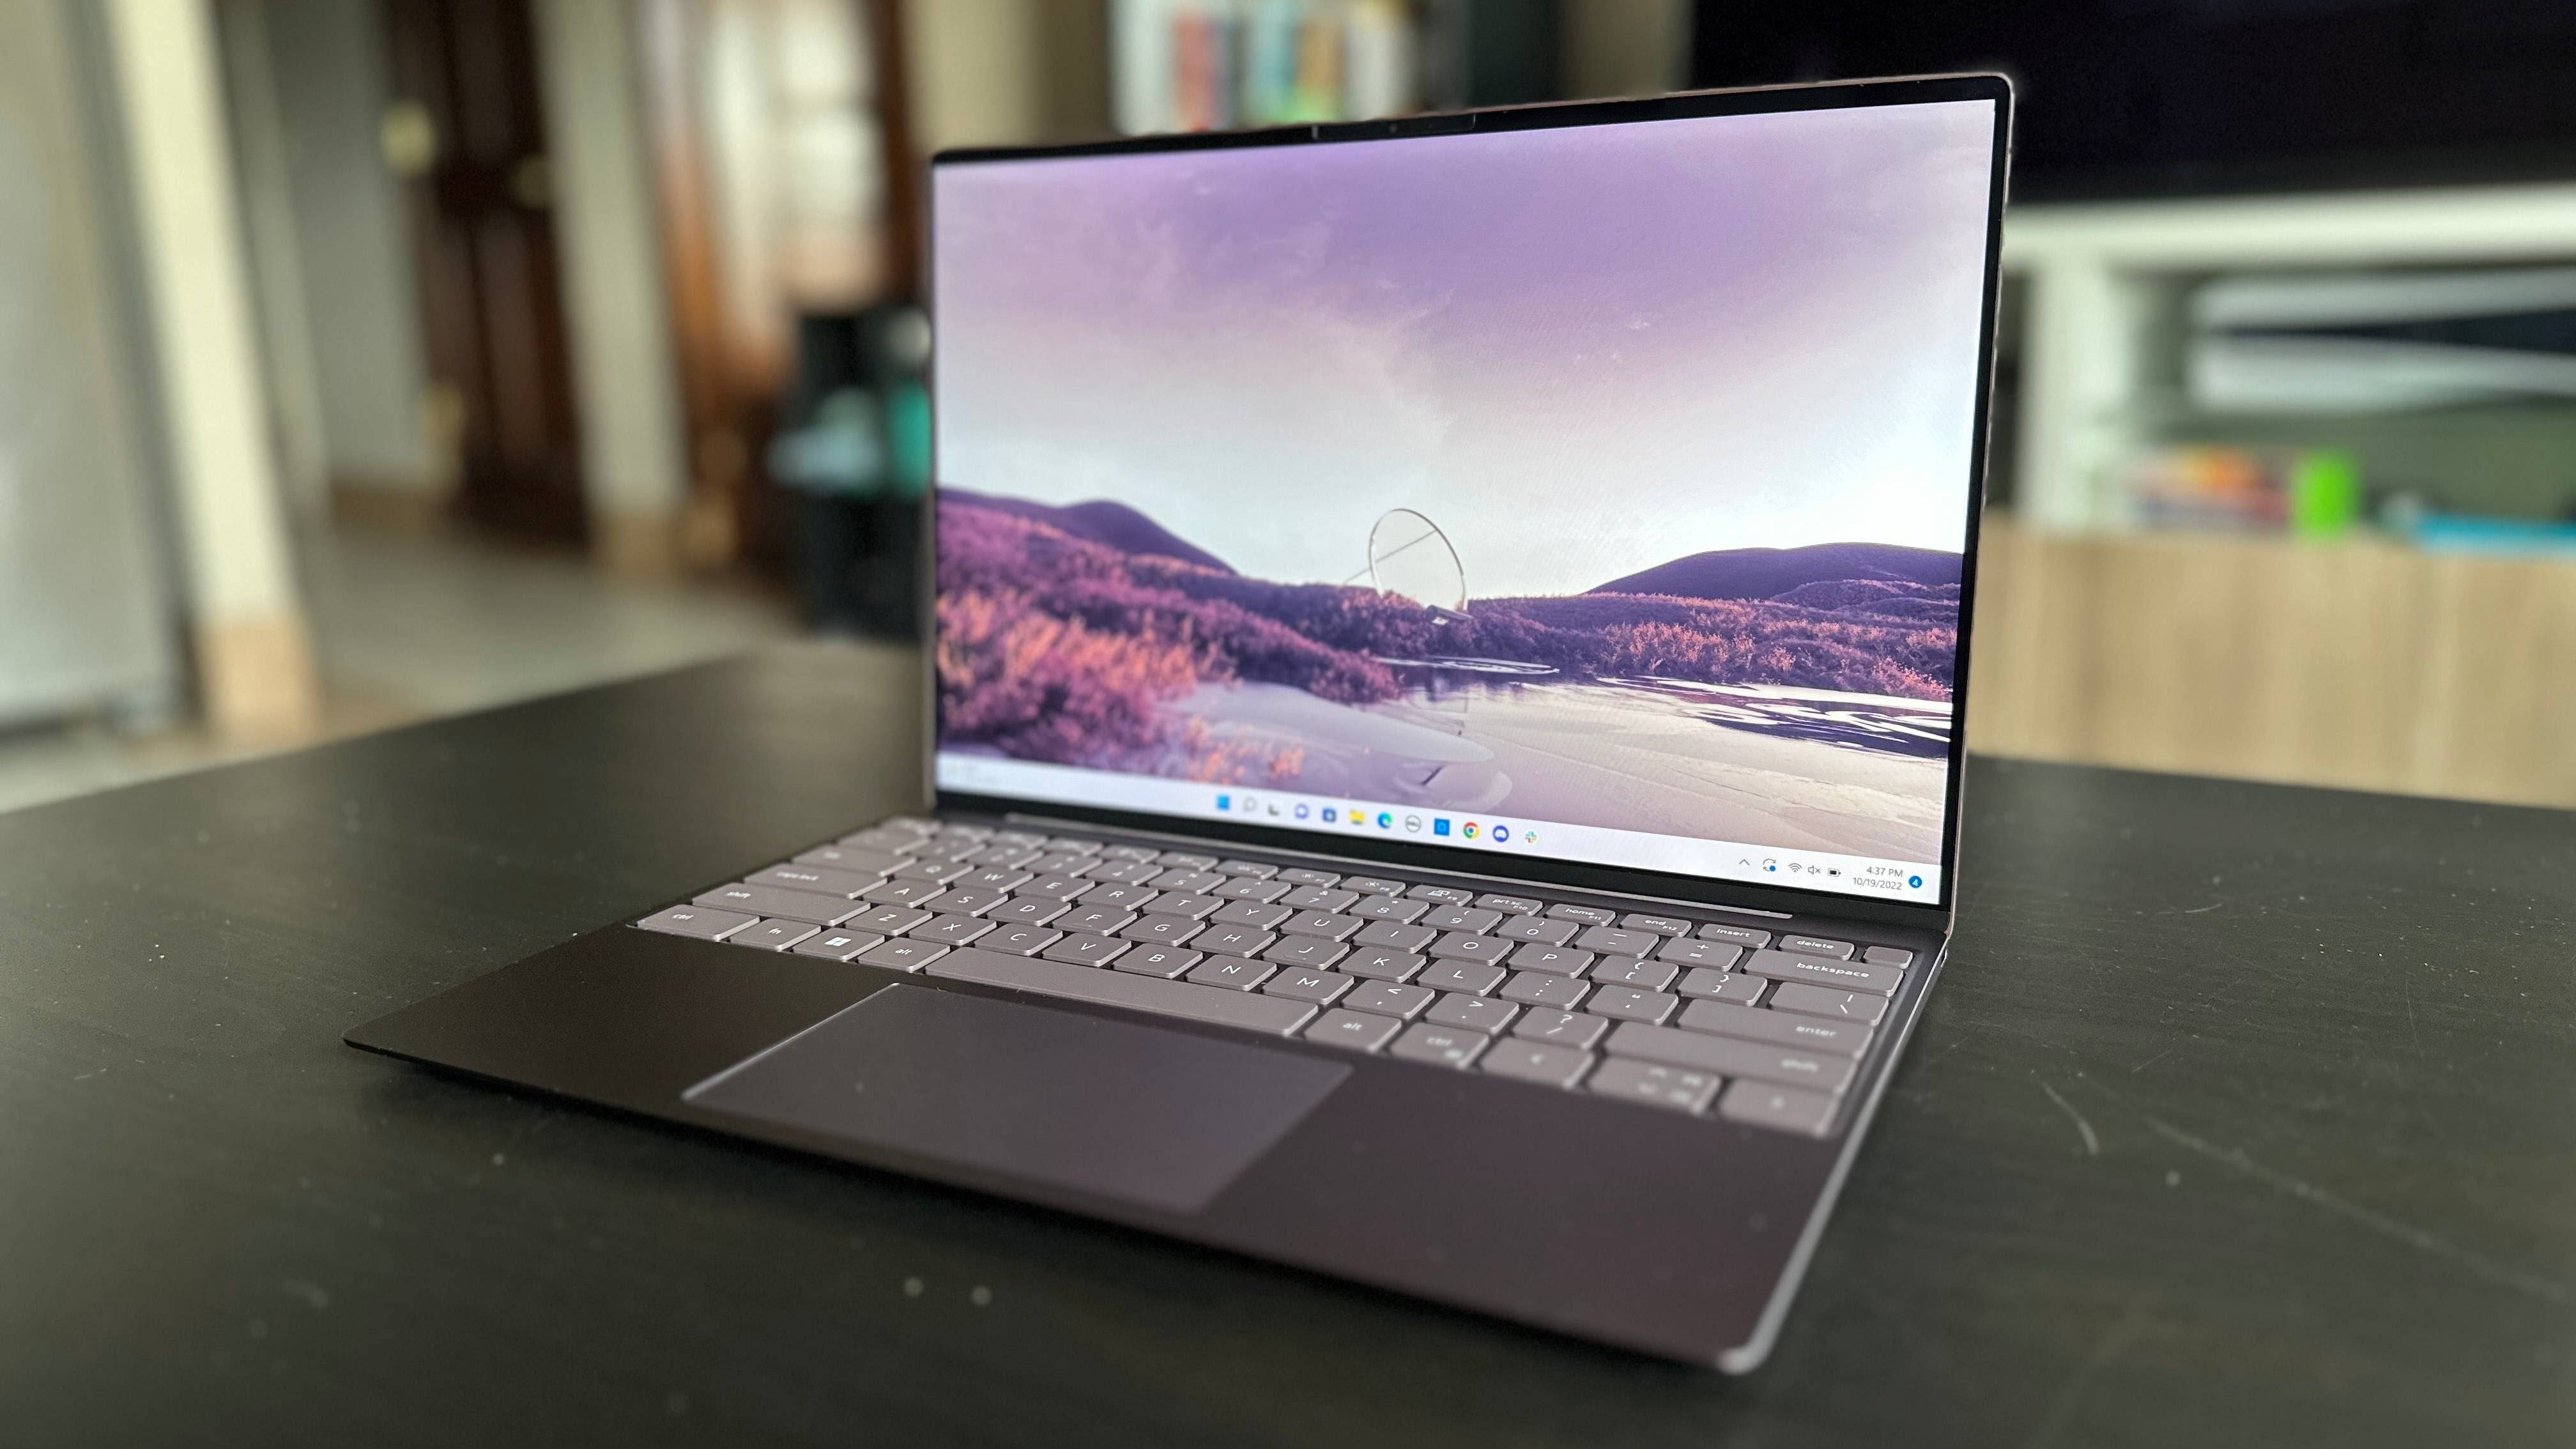 Dell XPS 13 review: Dell is coasting (and that's fine) - The Verge